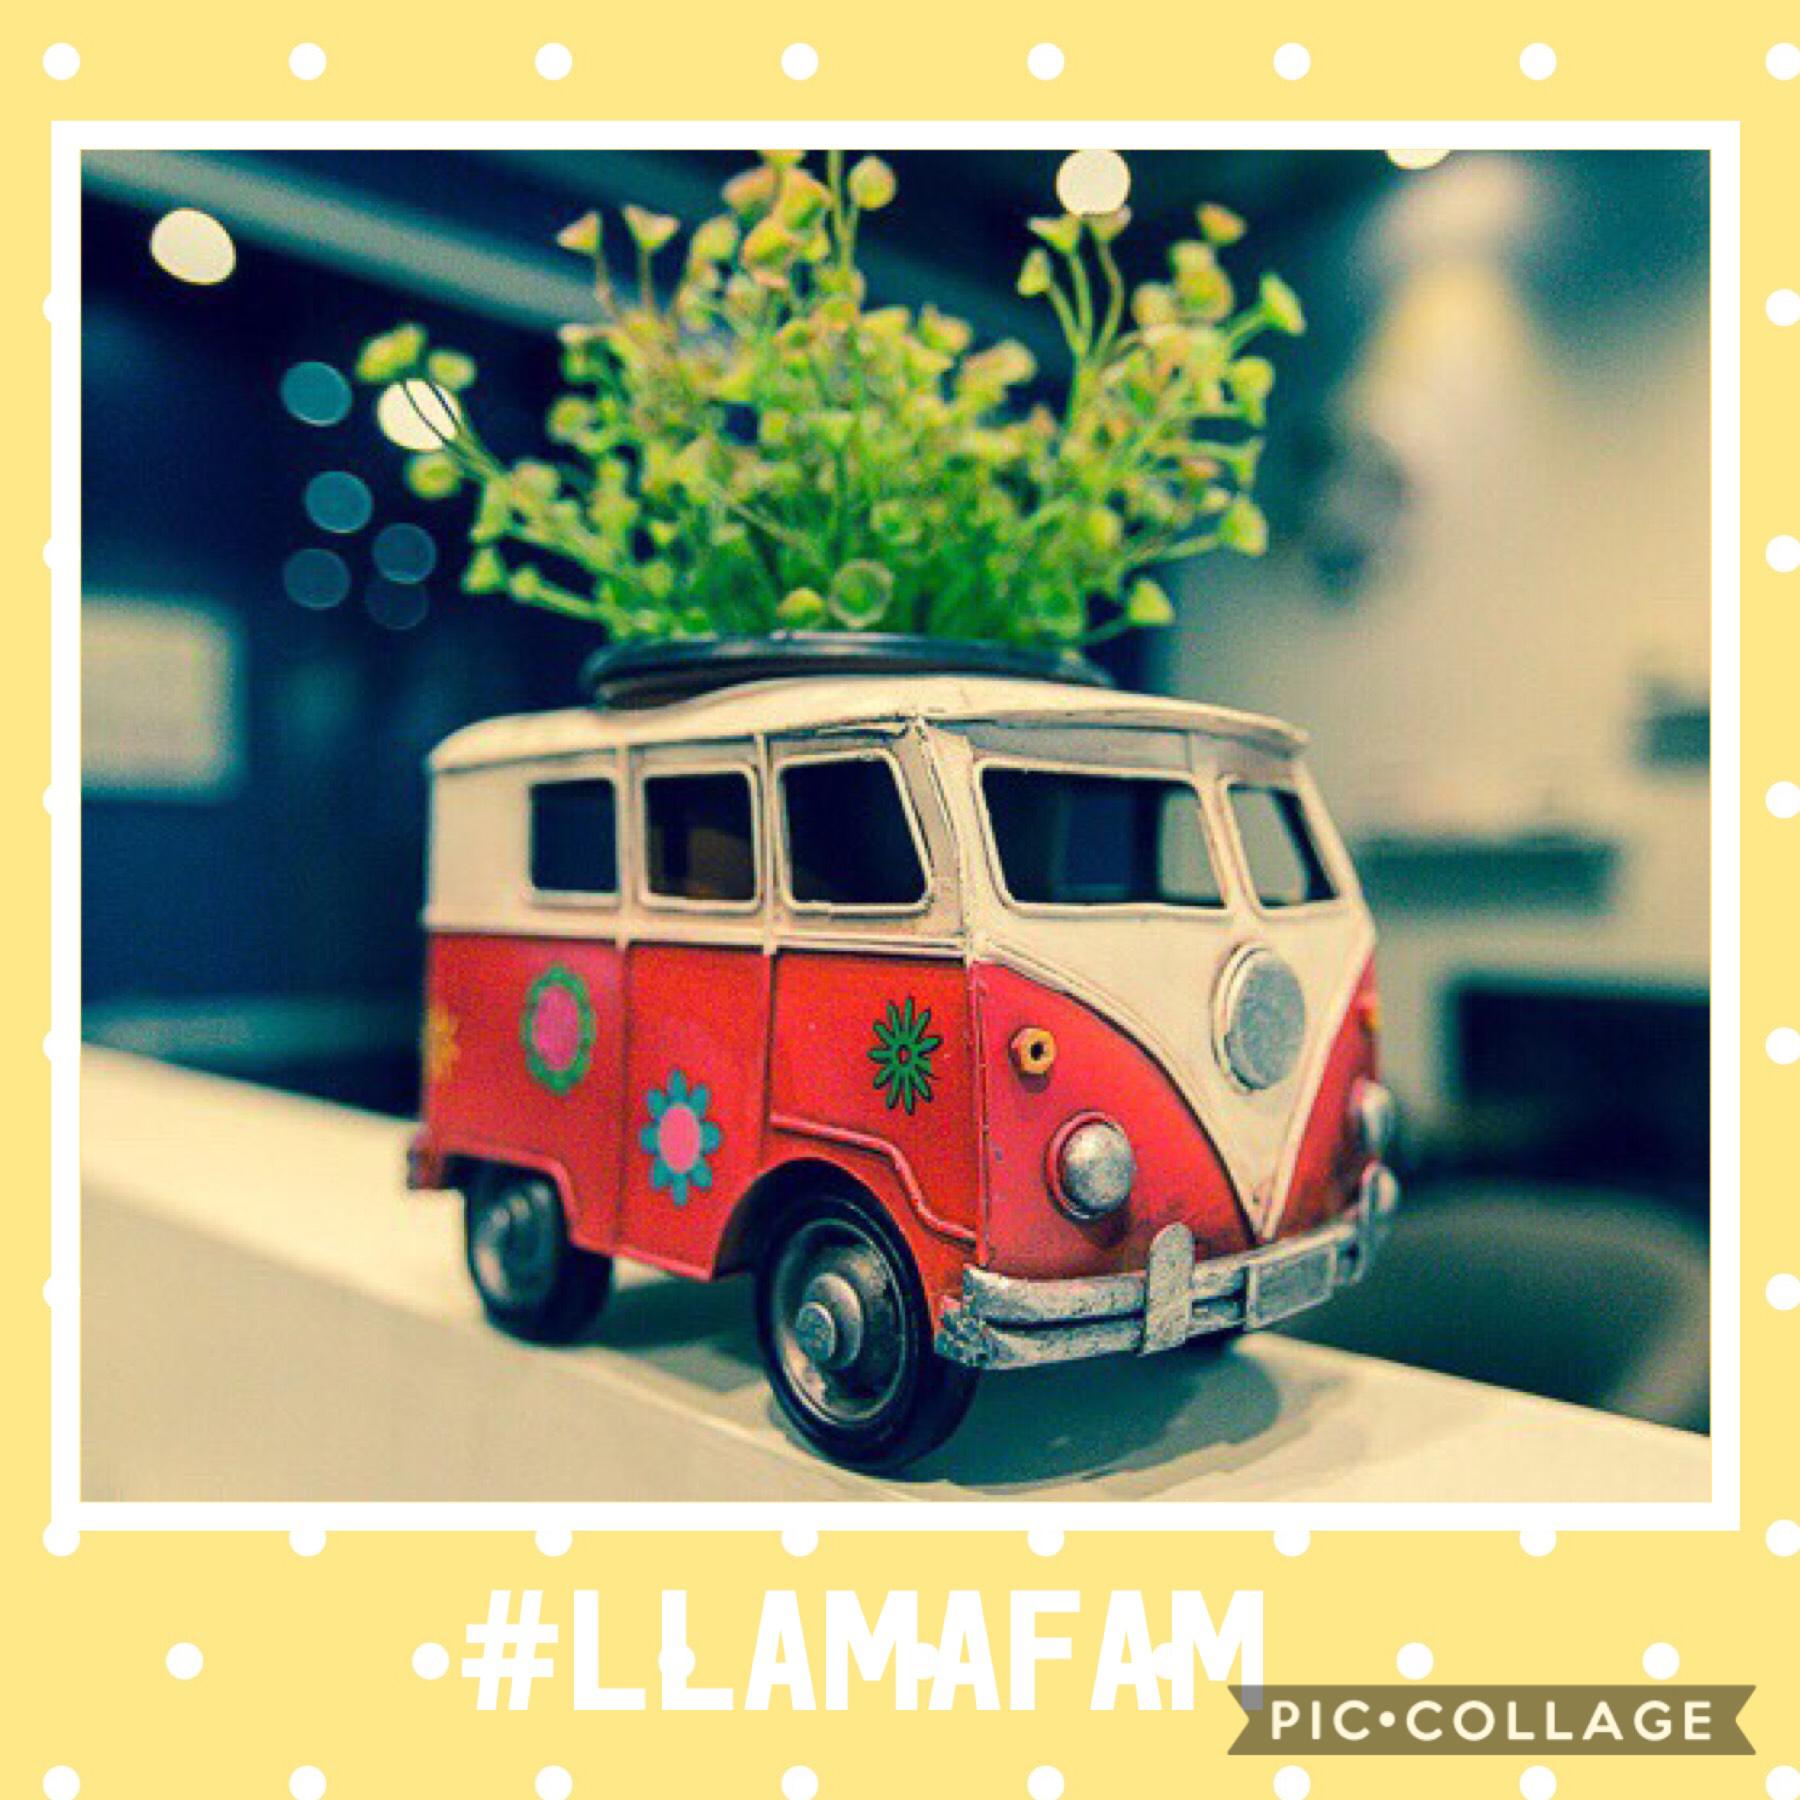 If u want to join my drama squad, say #llamafam and you will be in my drama squad! (I got the pic from a puzzle app I did the puzzle last night)